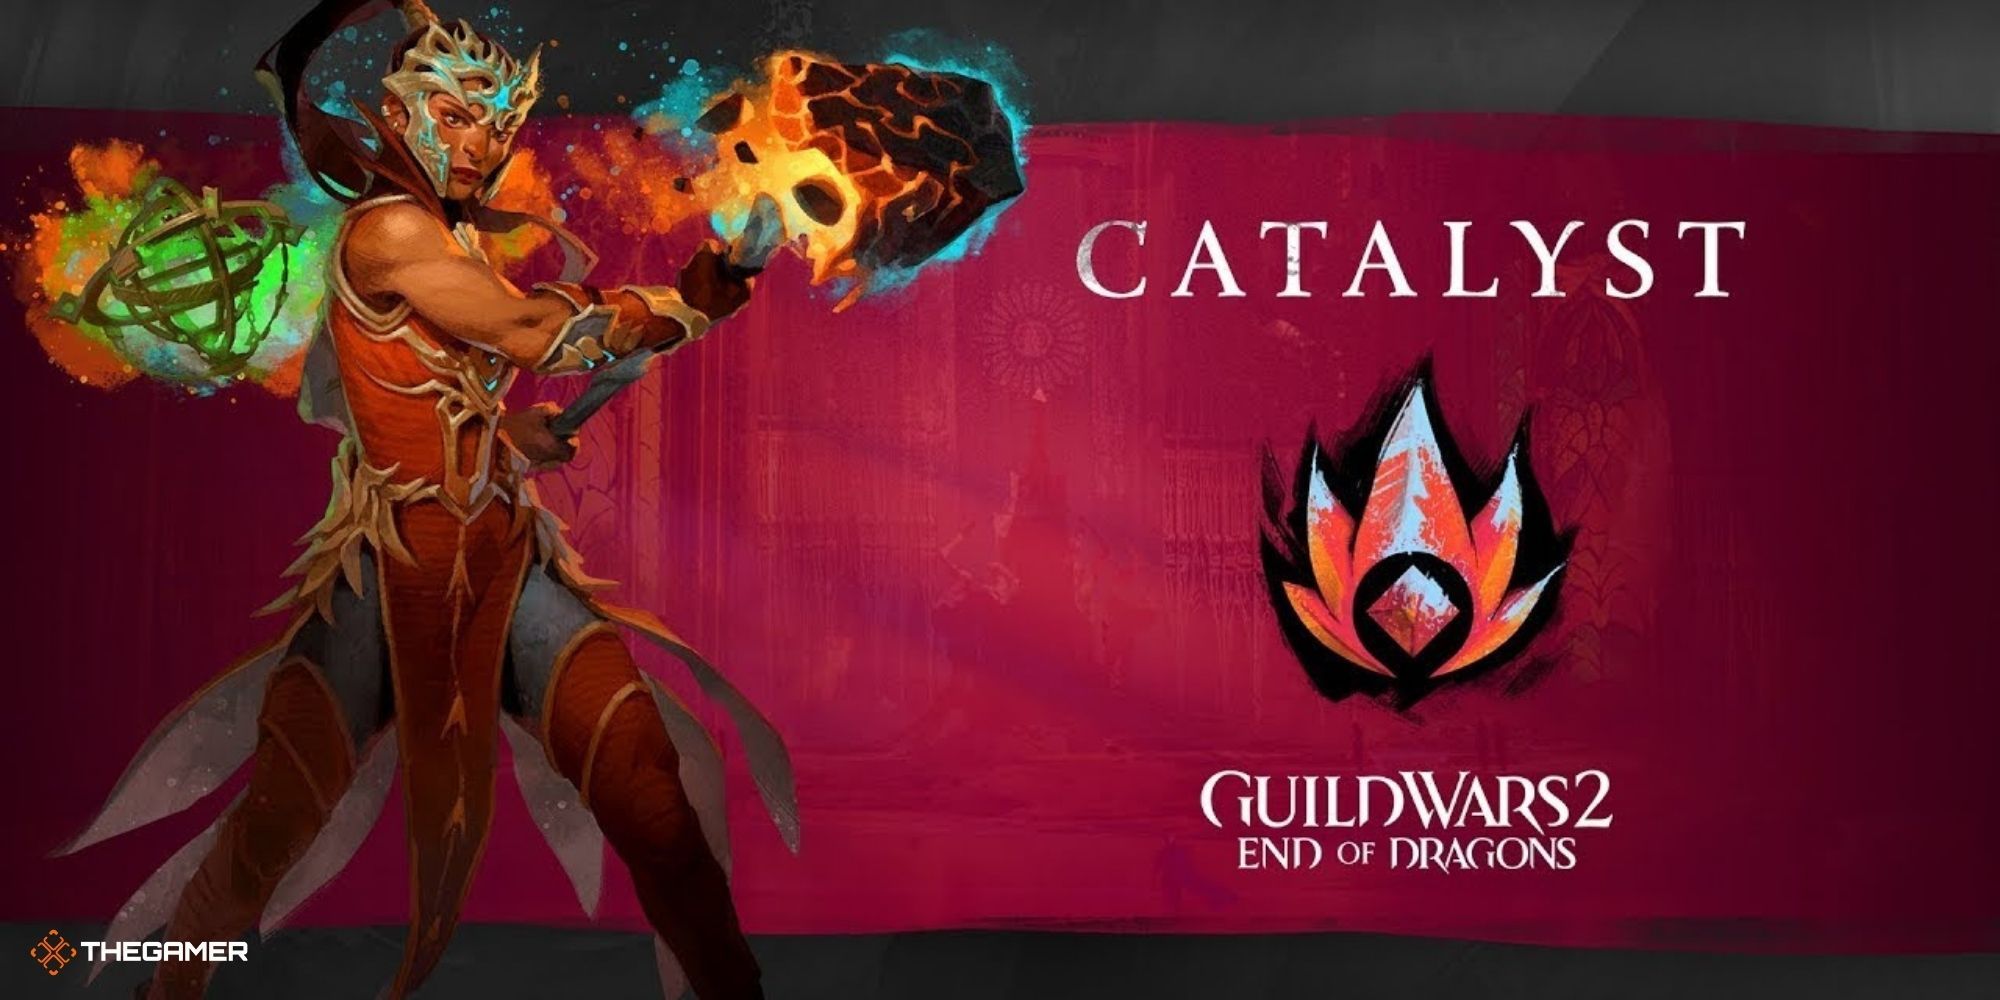 Guild Wars 2 End of Dragons - Catalyst Specialization art